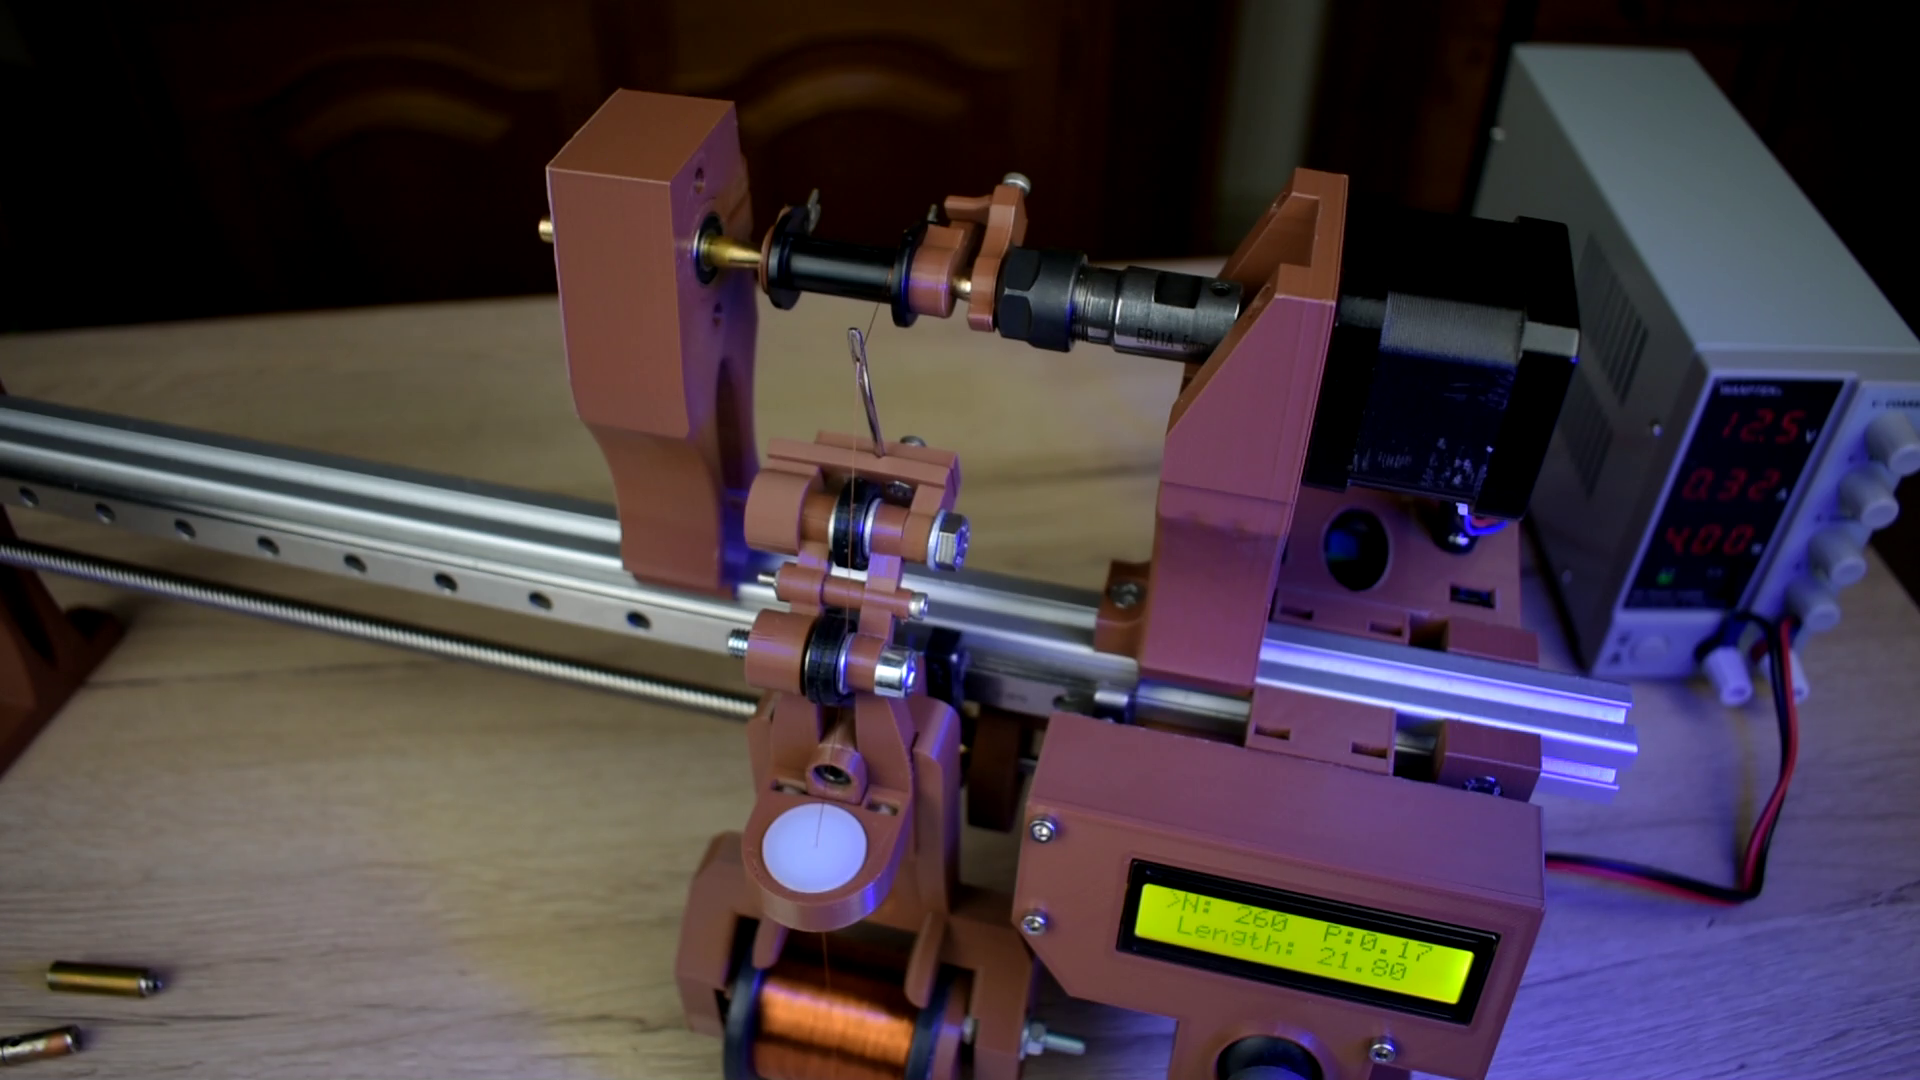 CNC controlled coil winding machine by DesignCircle, Download free STL  model